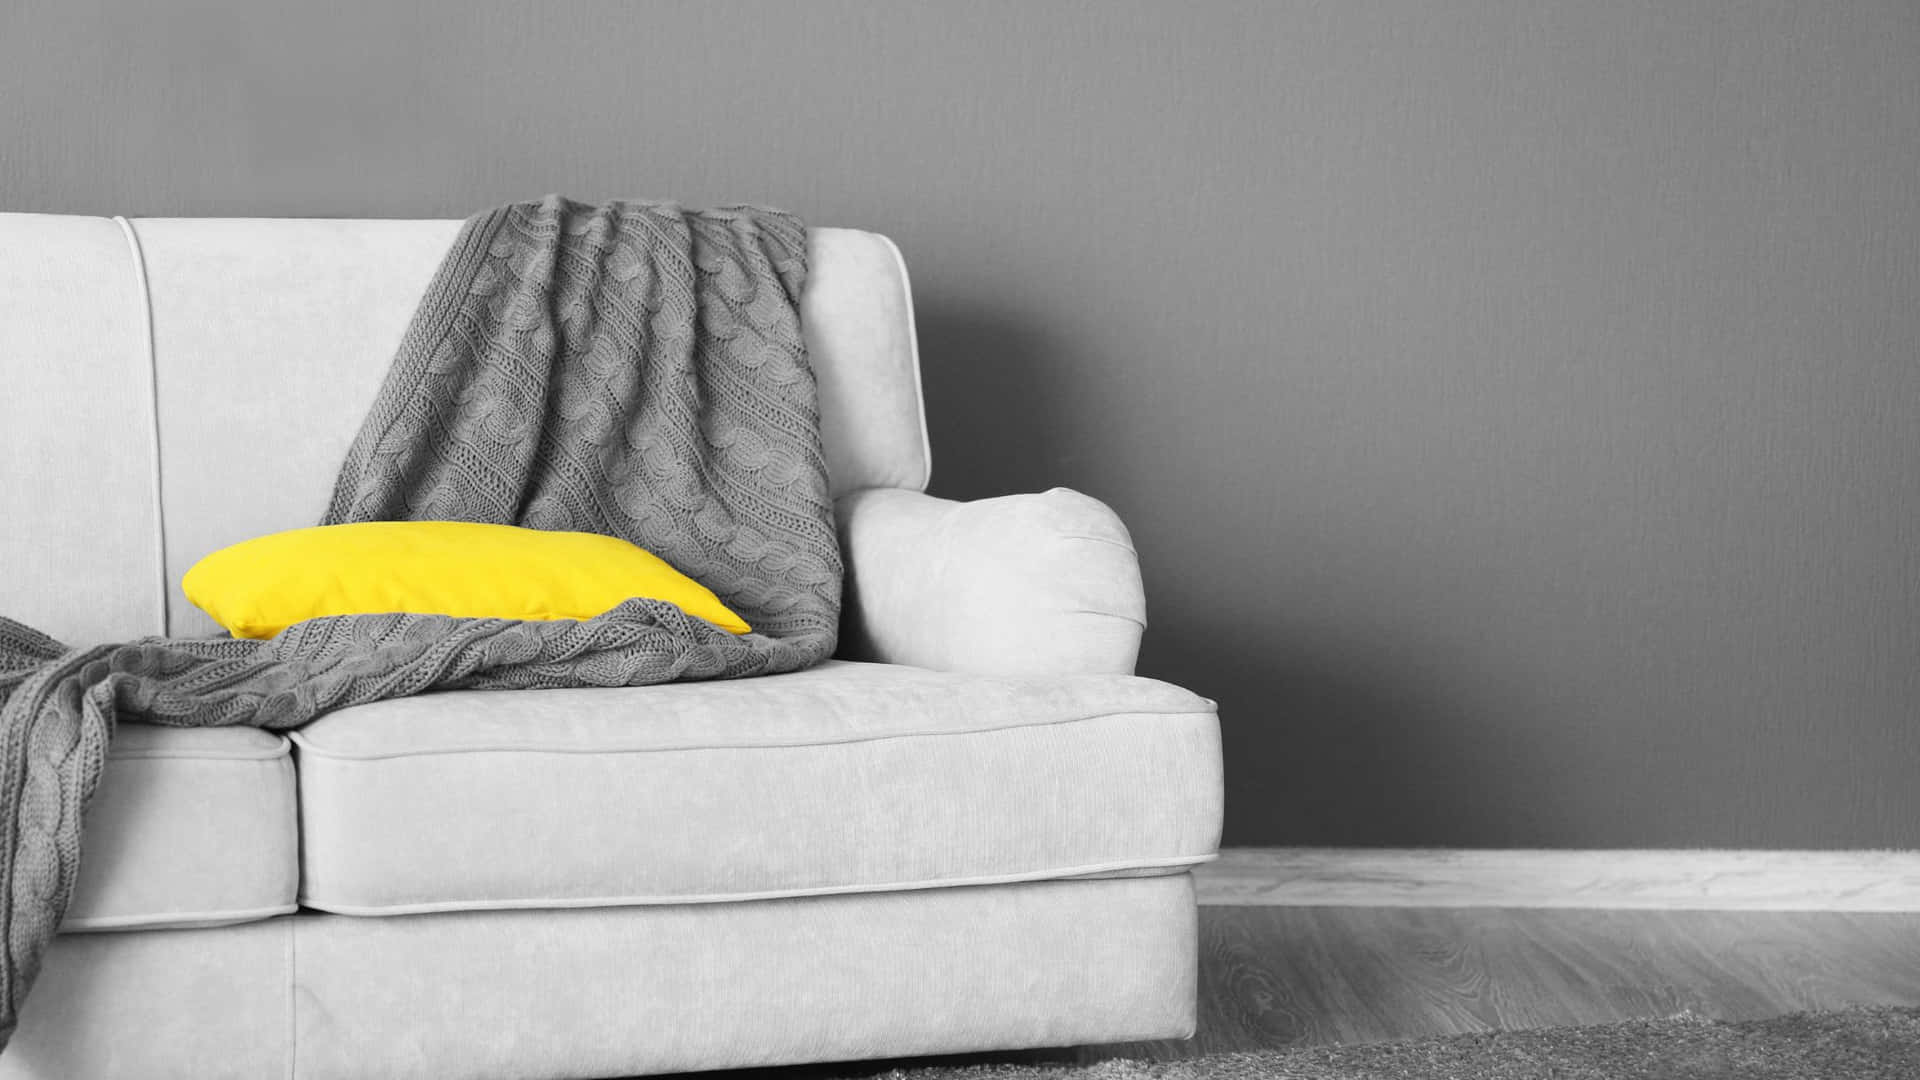 A White Couch With A Yellow Blanket